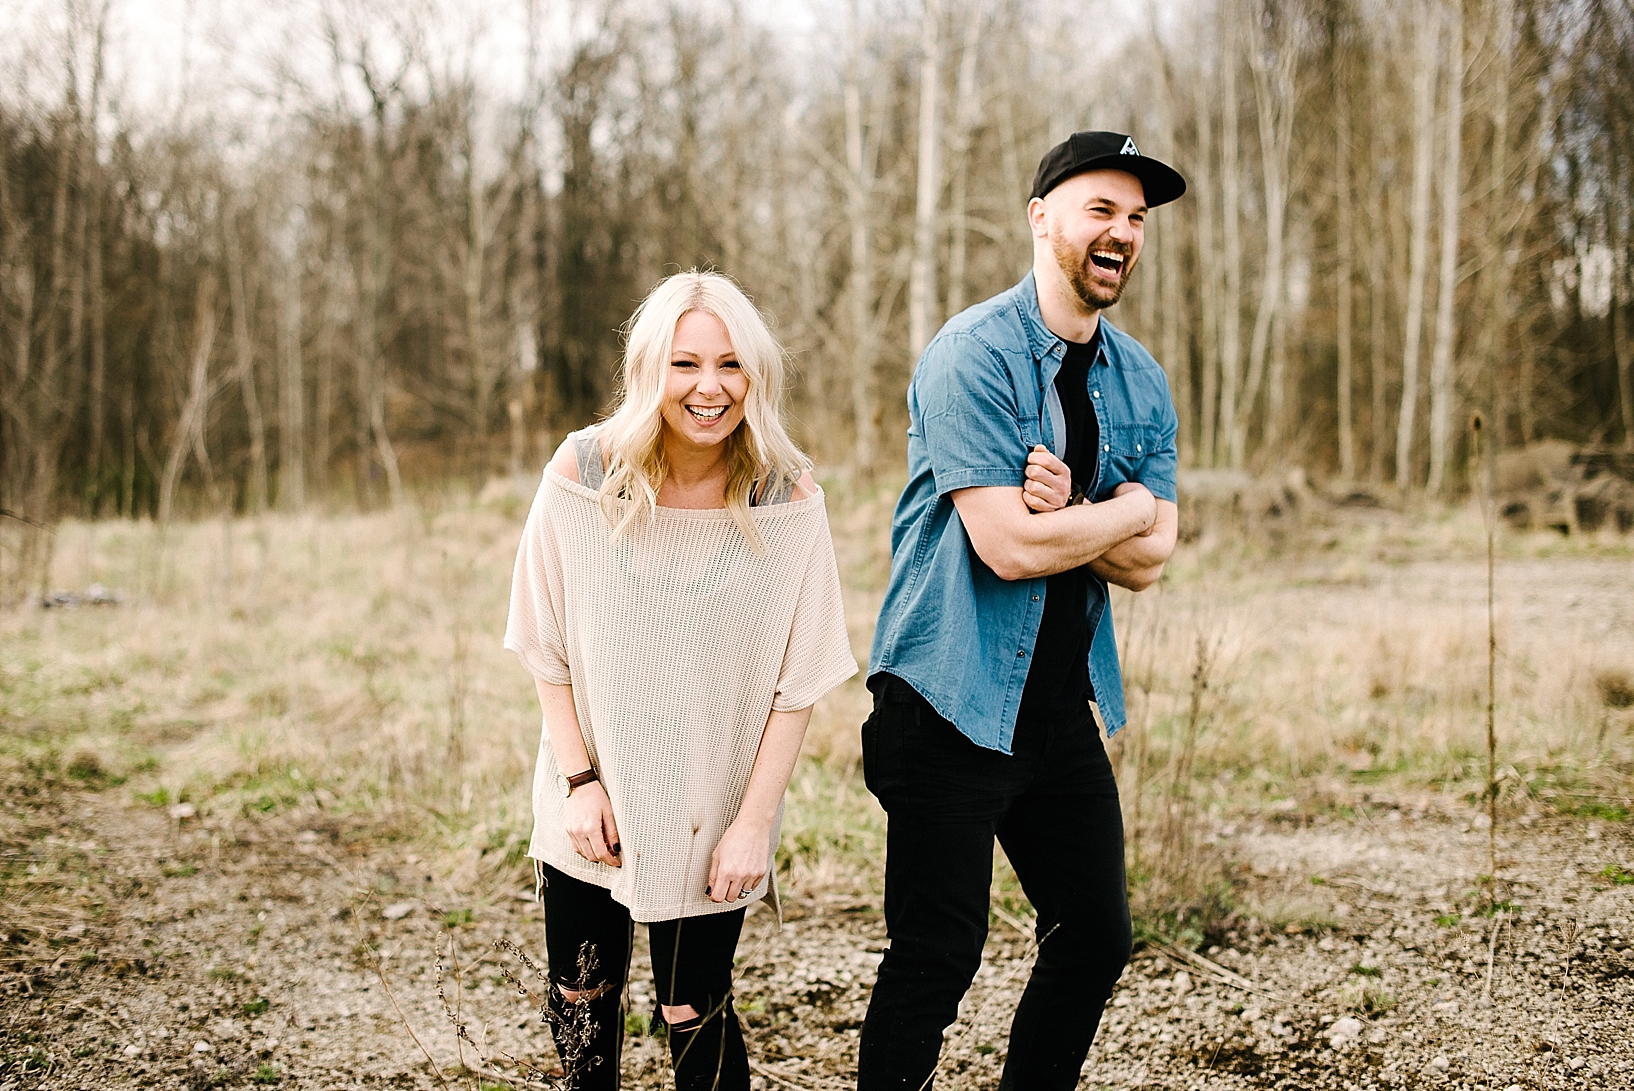 man and woman standing outdoors in field laughing